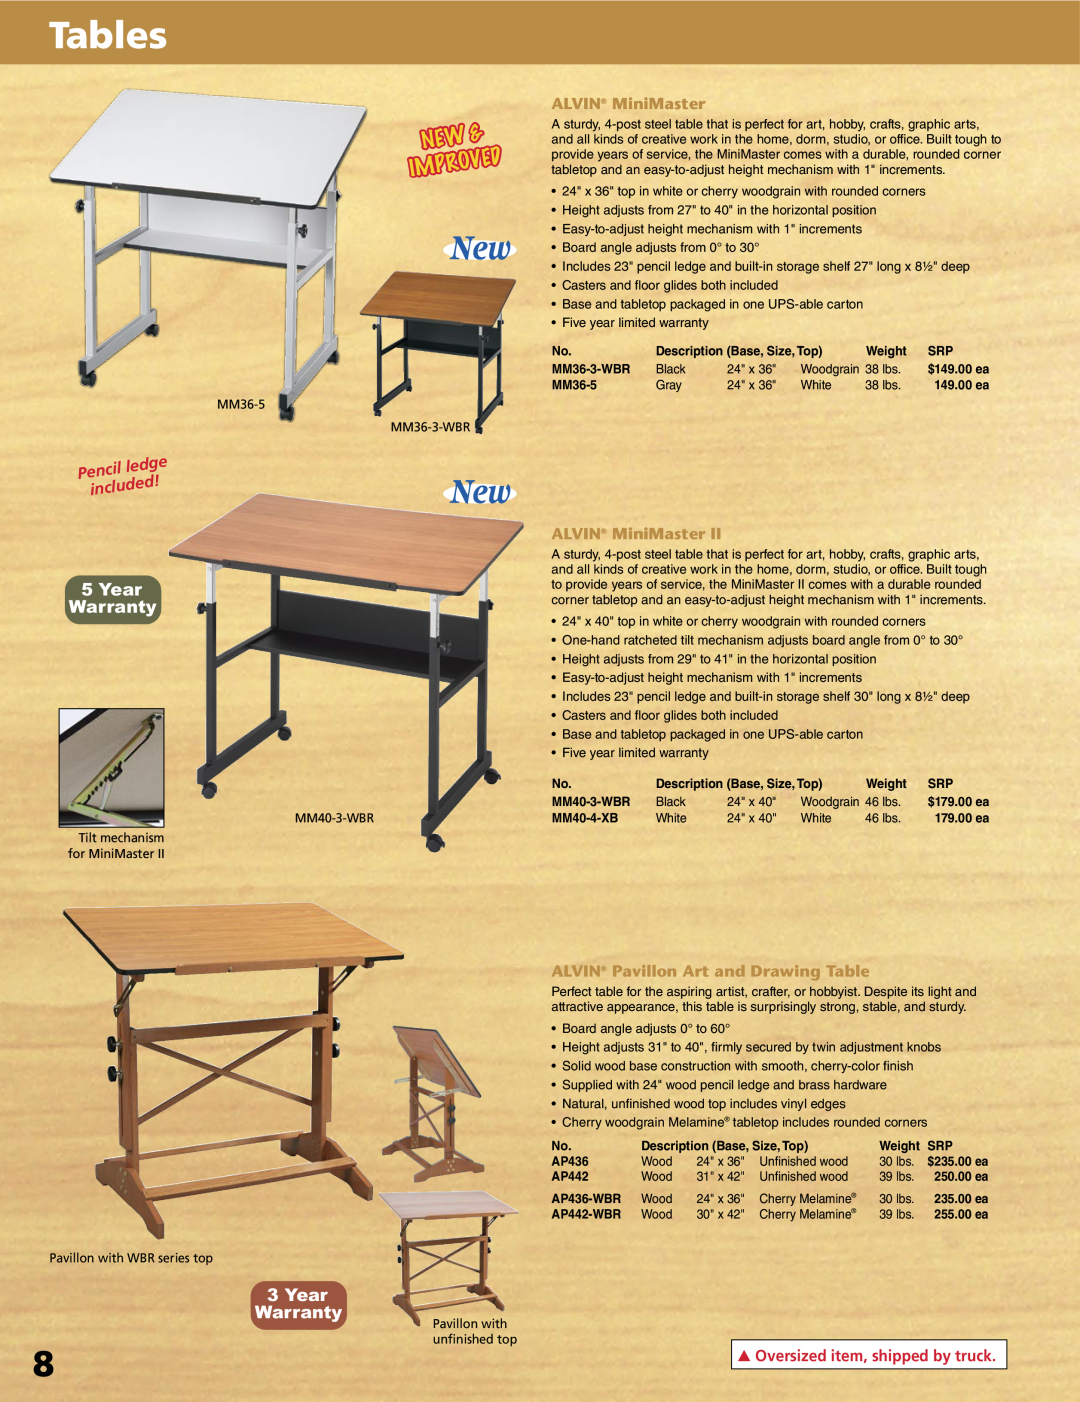 Alvin XX-4-XB roved, Tables, 5Year Warranty, Pencil, ledge, included, ALVIN MiniMaster, s Oversized item, shipped by truck 